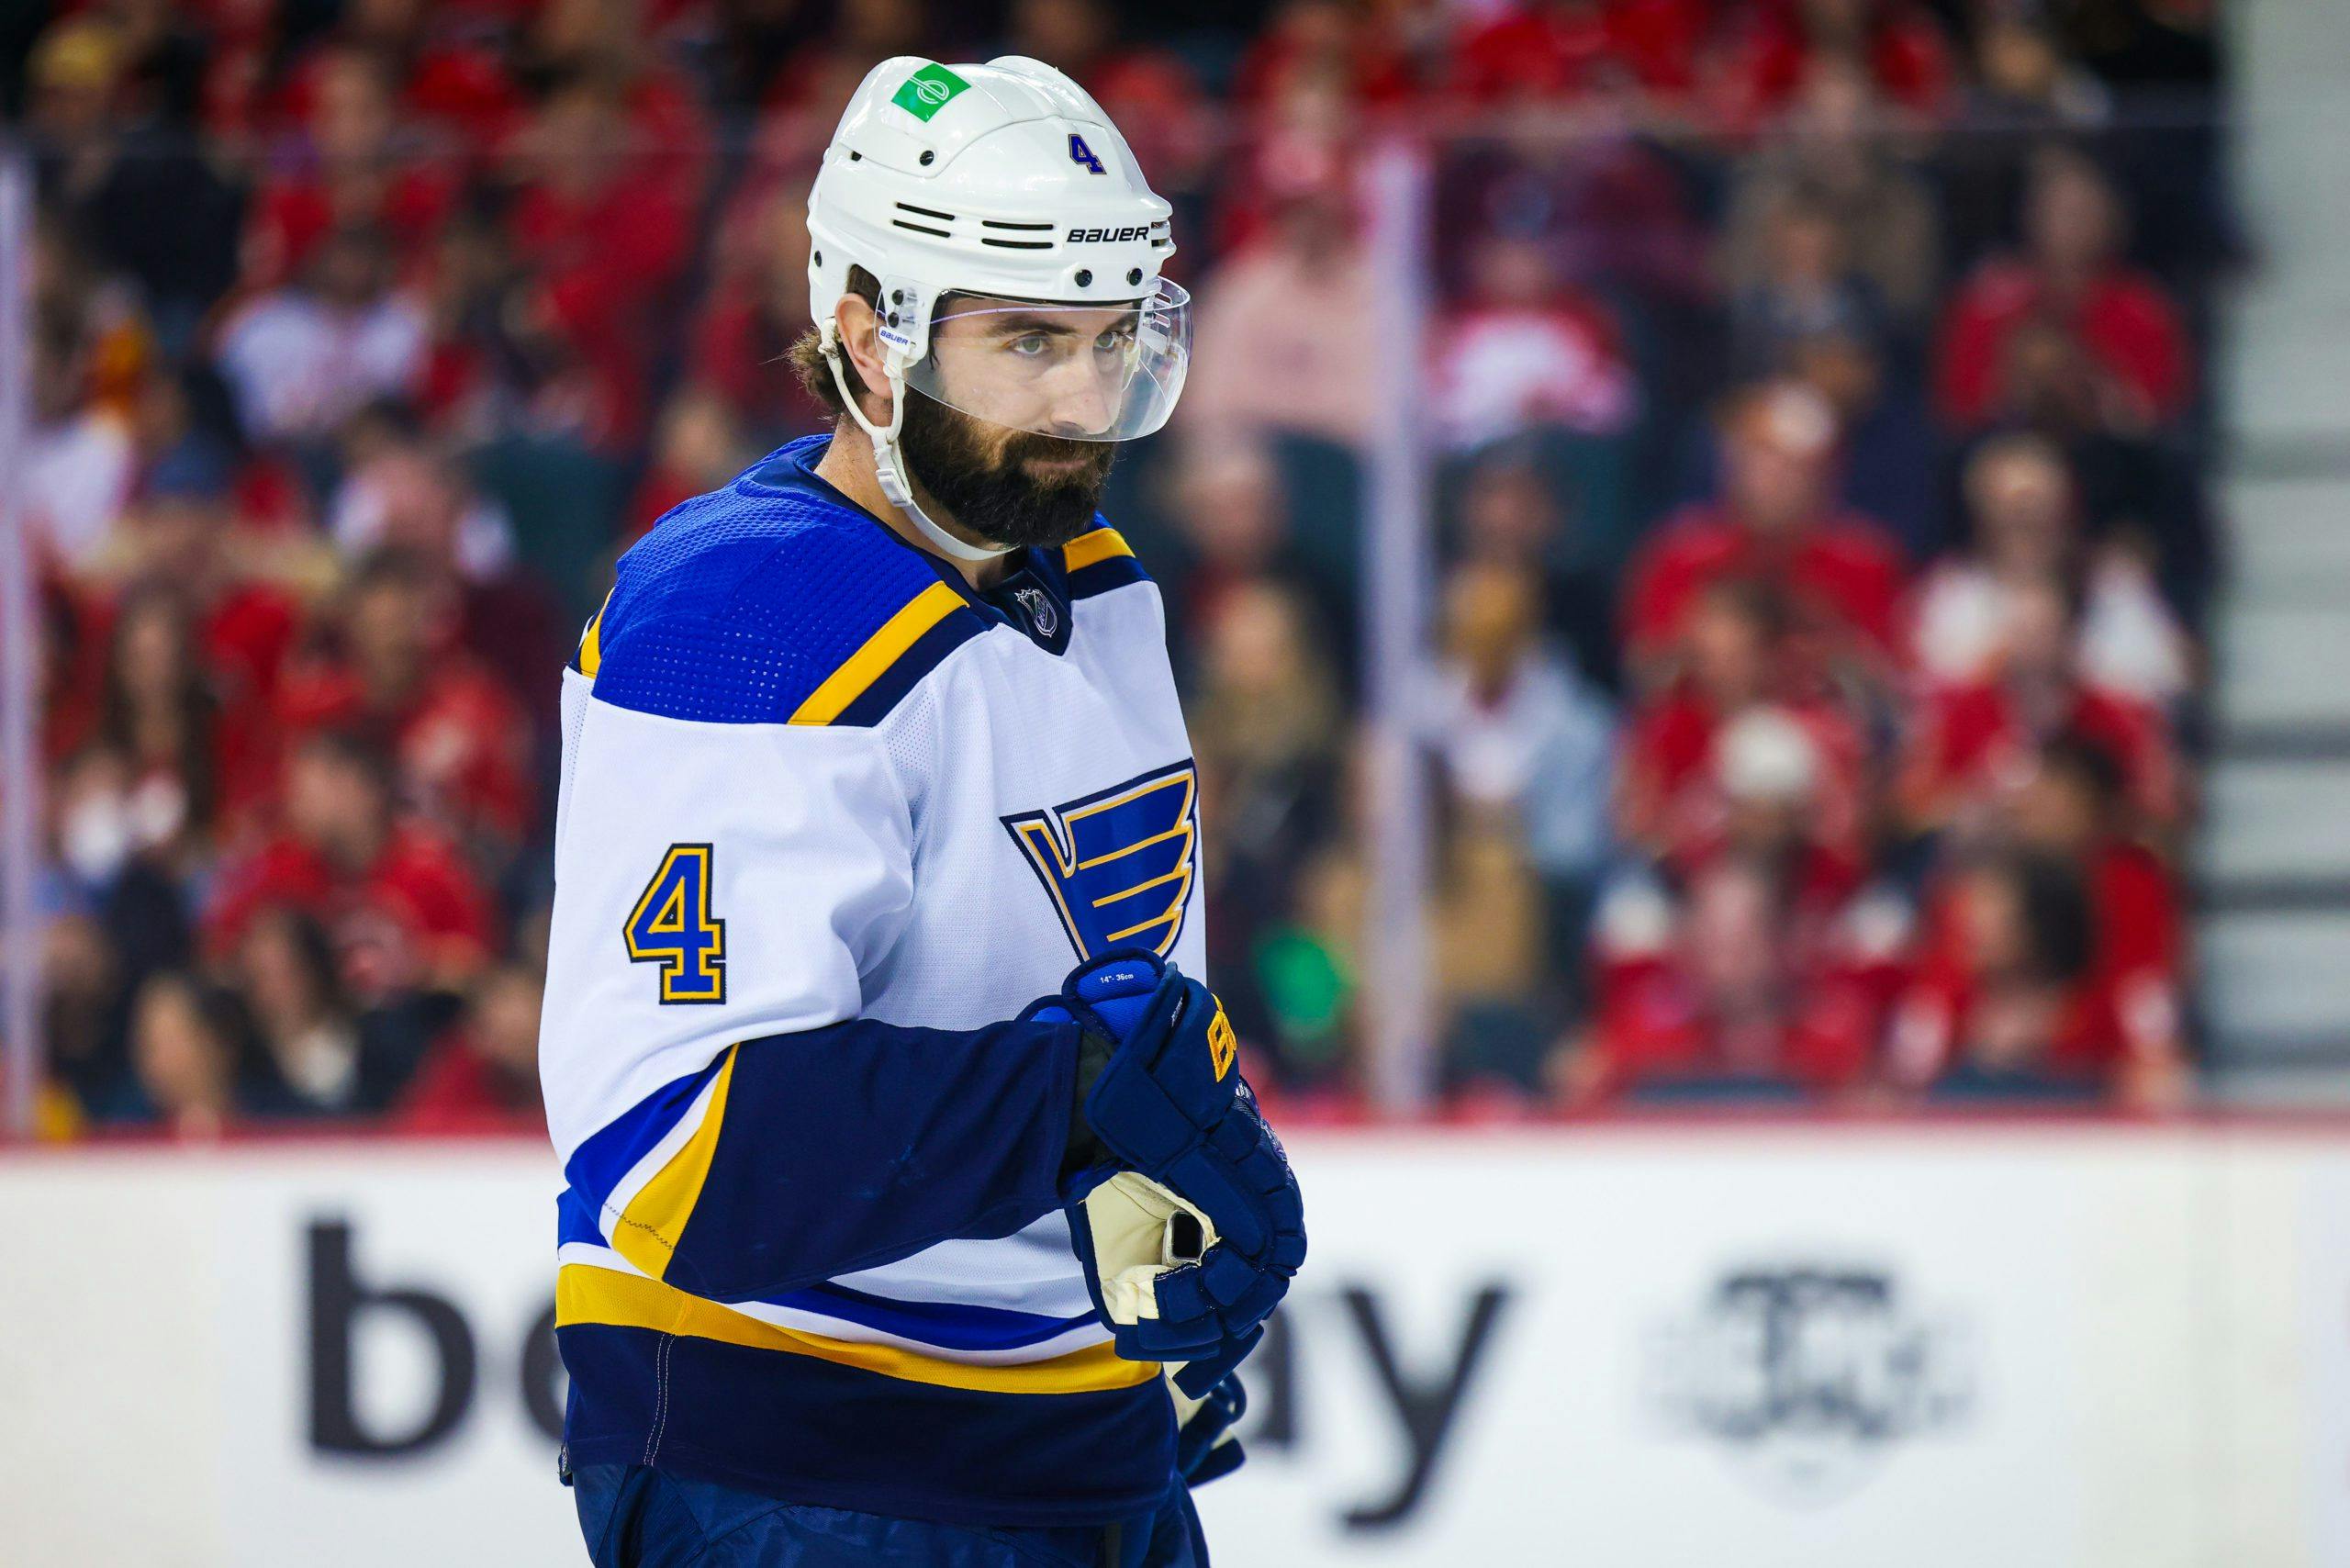 St. Louis Blues re-sign defenseman Nick Leddy on four-year contract at $4 million AAV